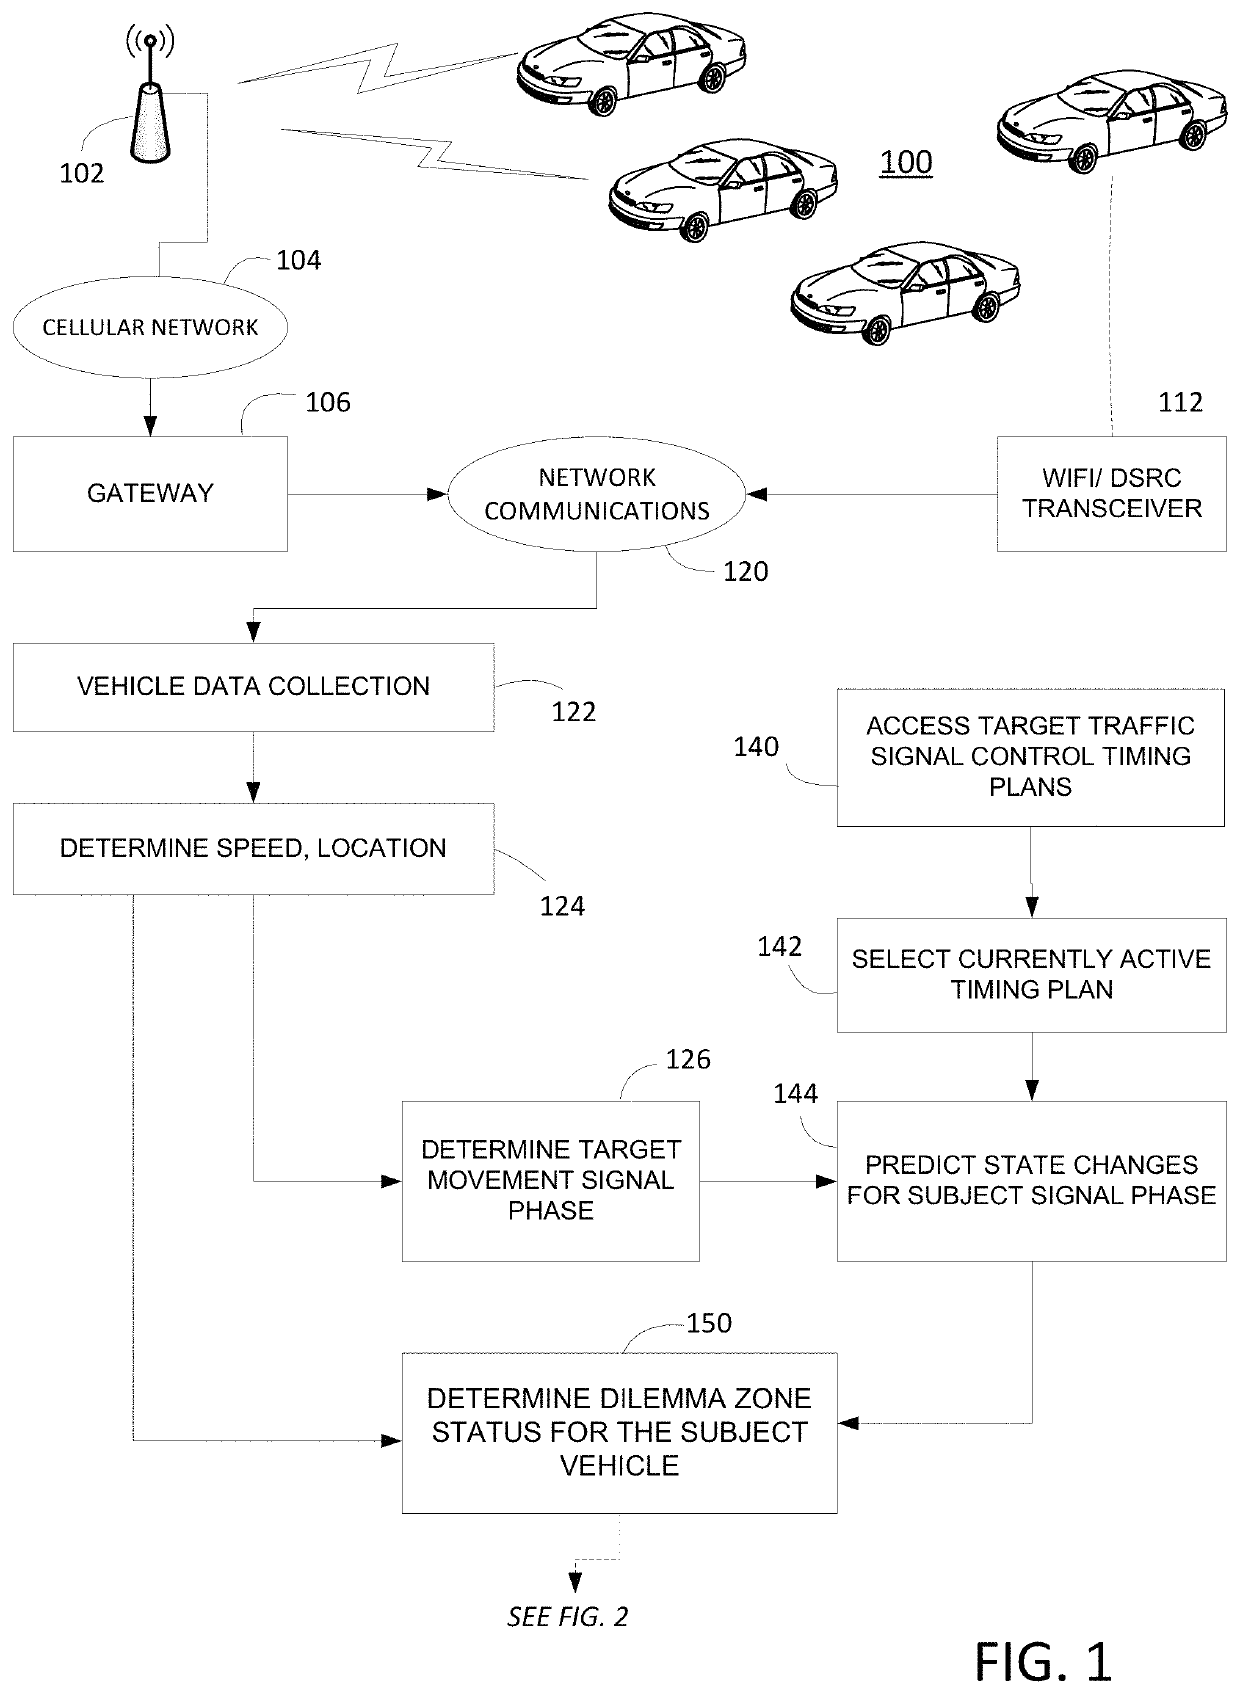 Vehicle dilemma zone warning using artificial detection